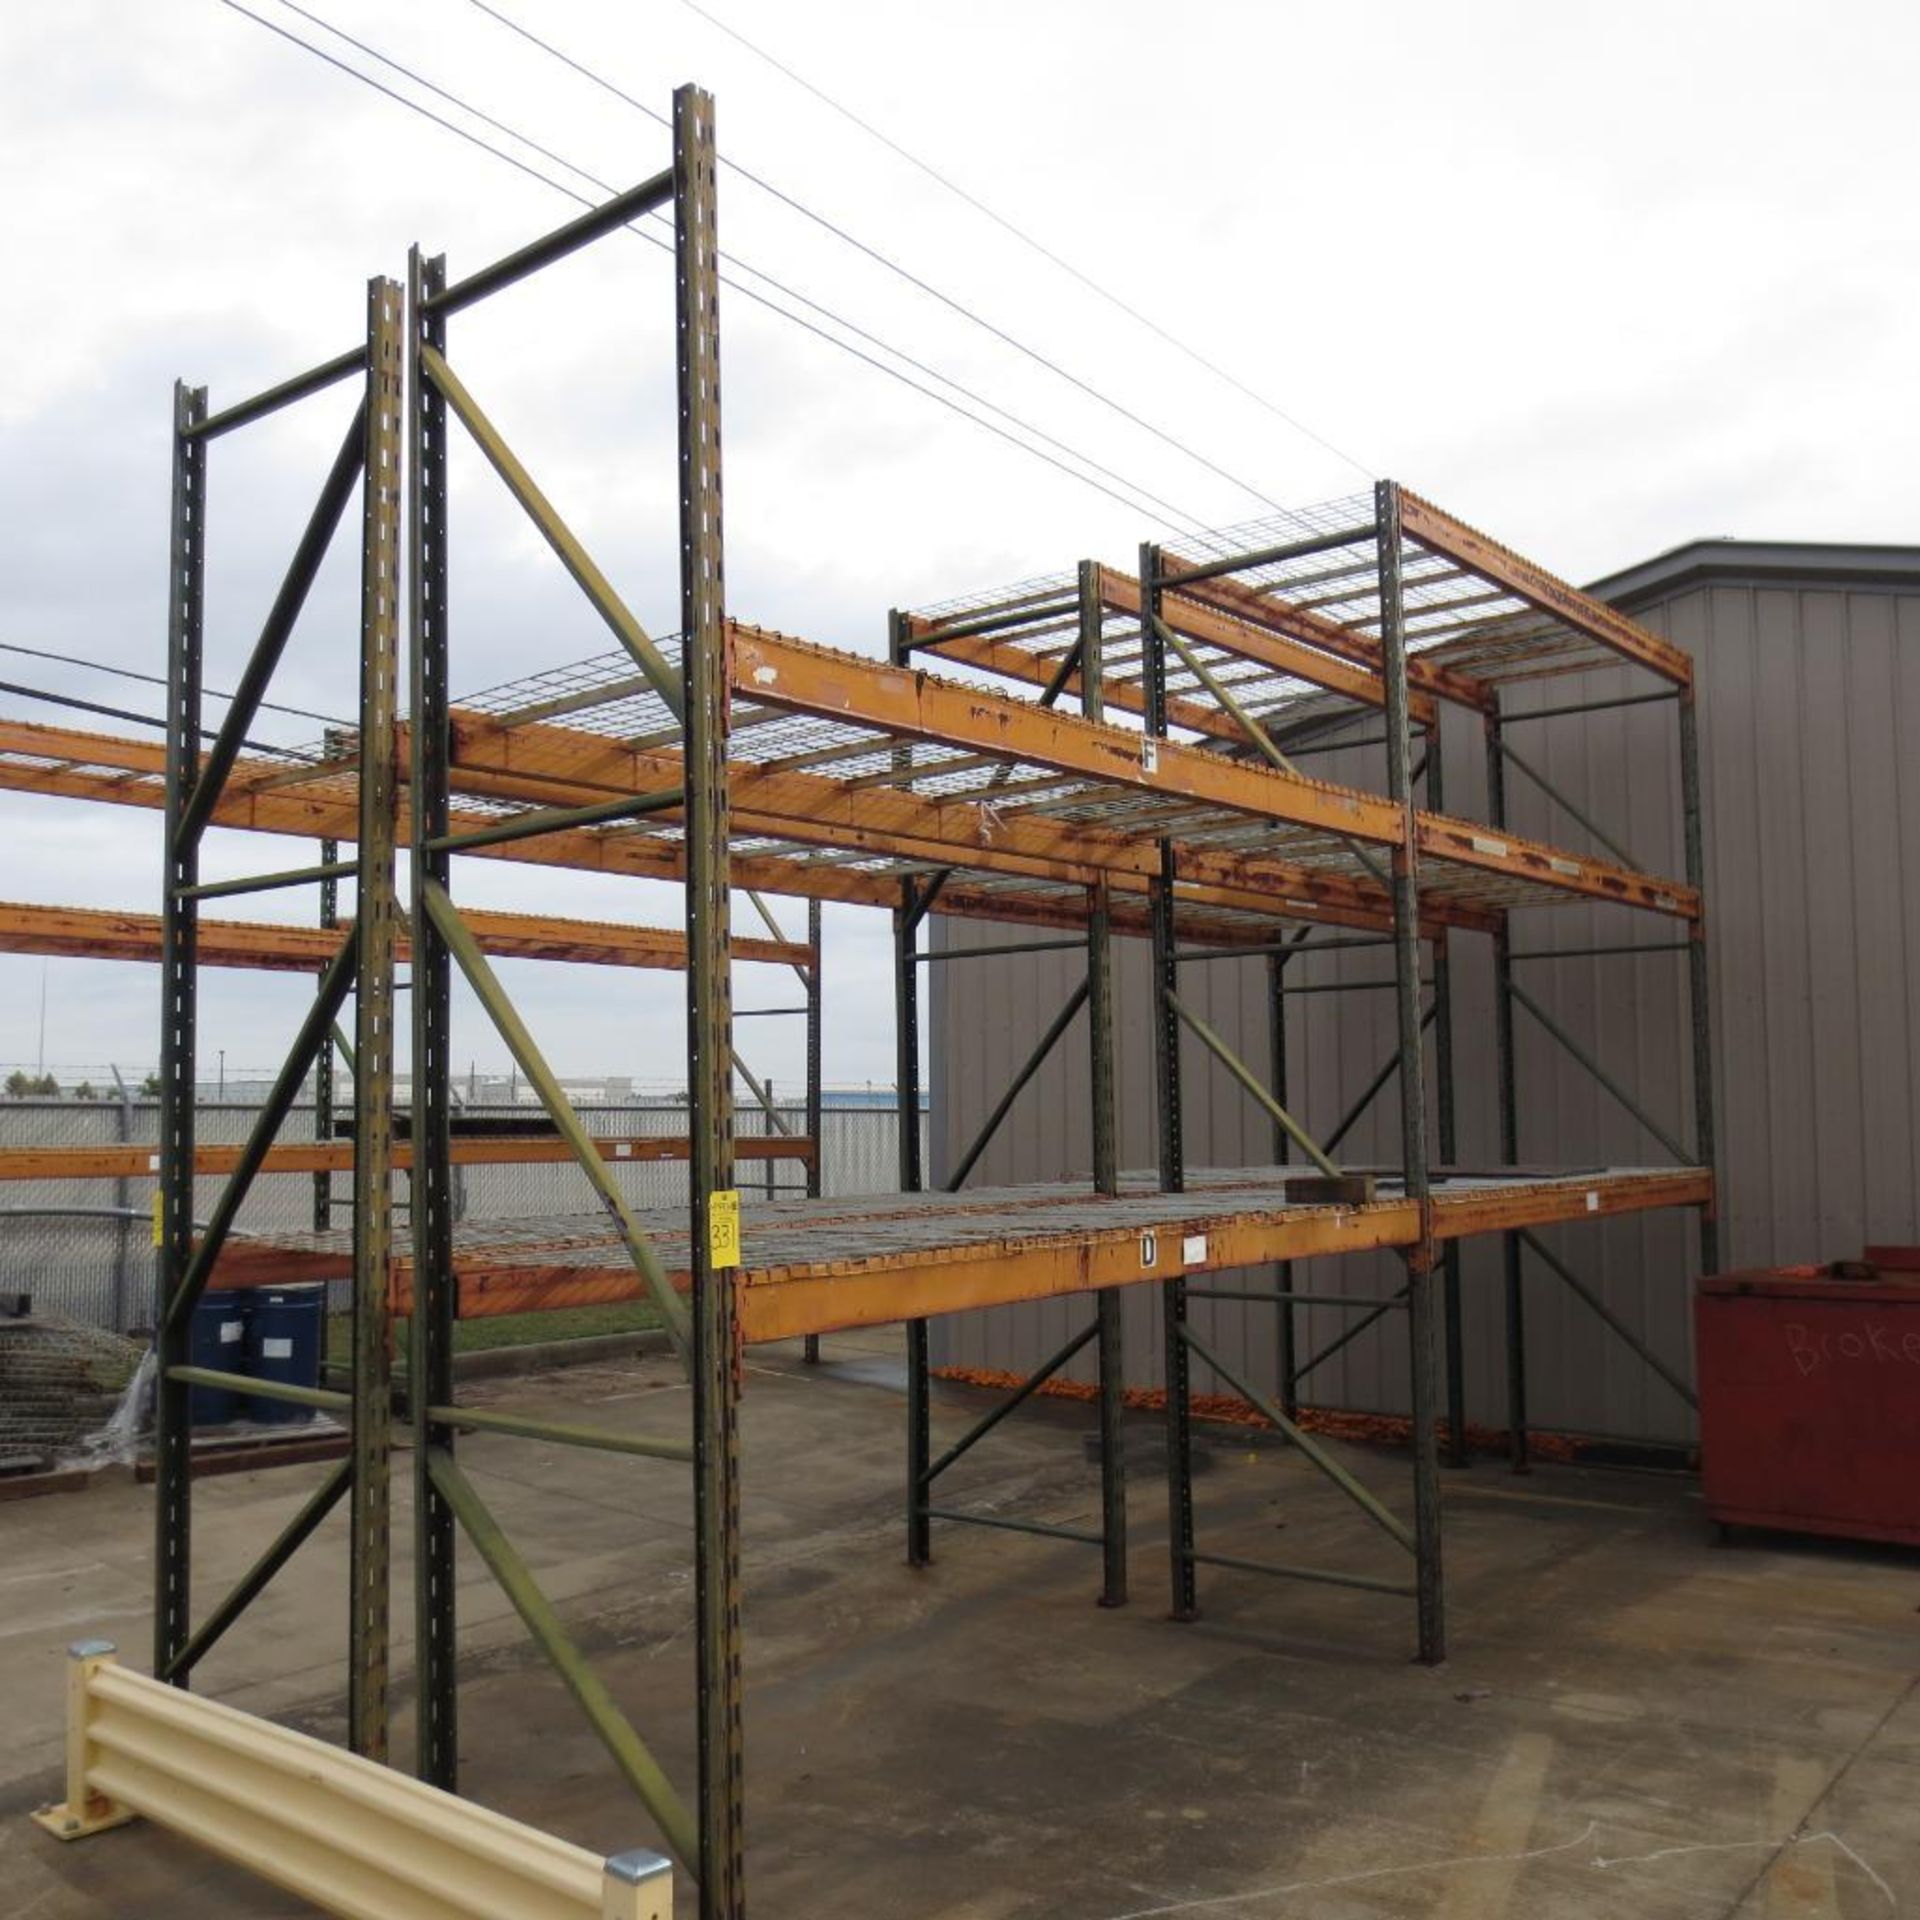 (2) Section of Pallet Racking 14' X 45" Legs with 11' Cross Beam